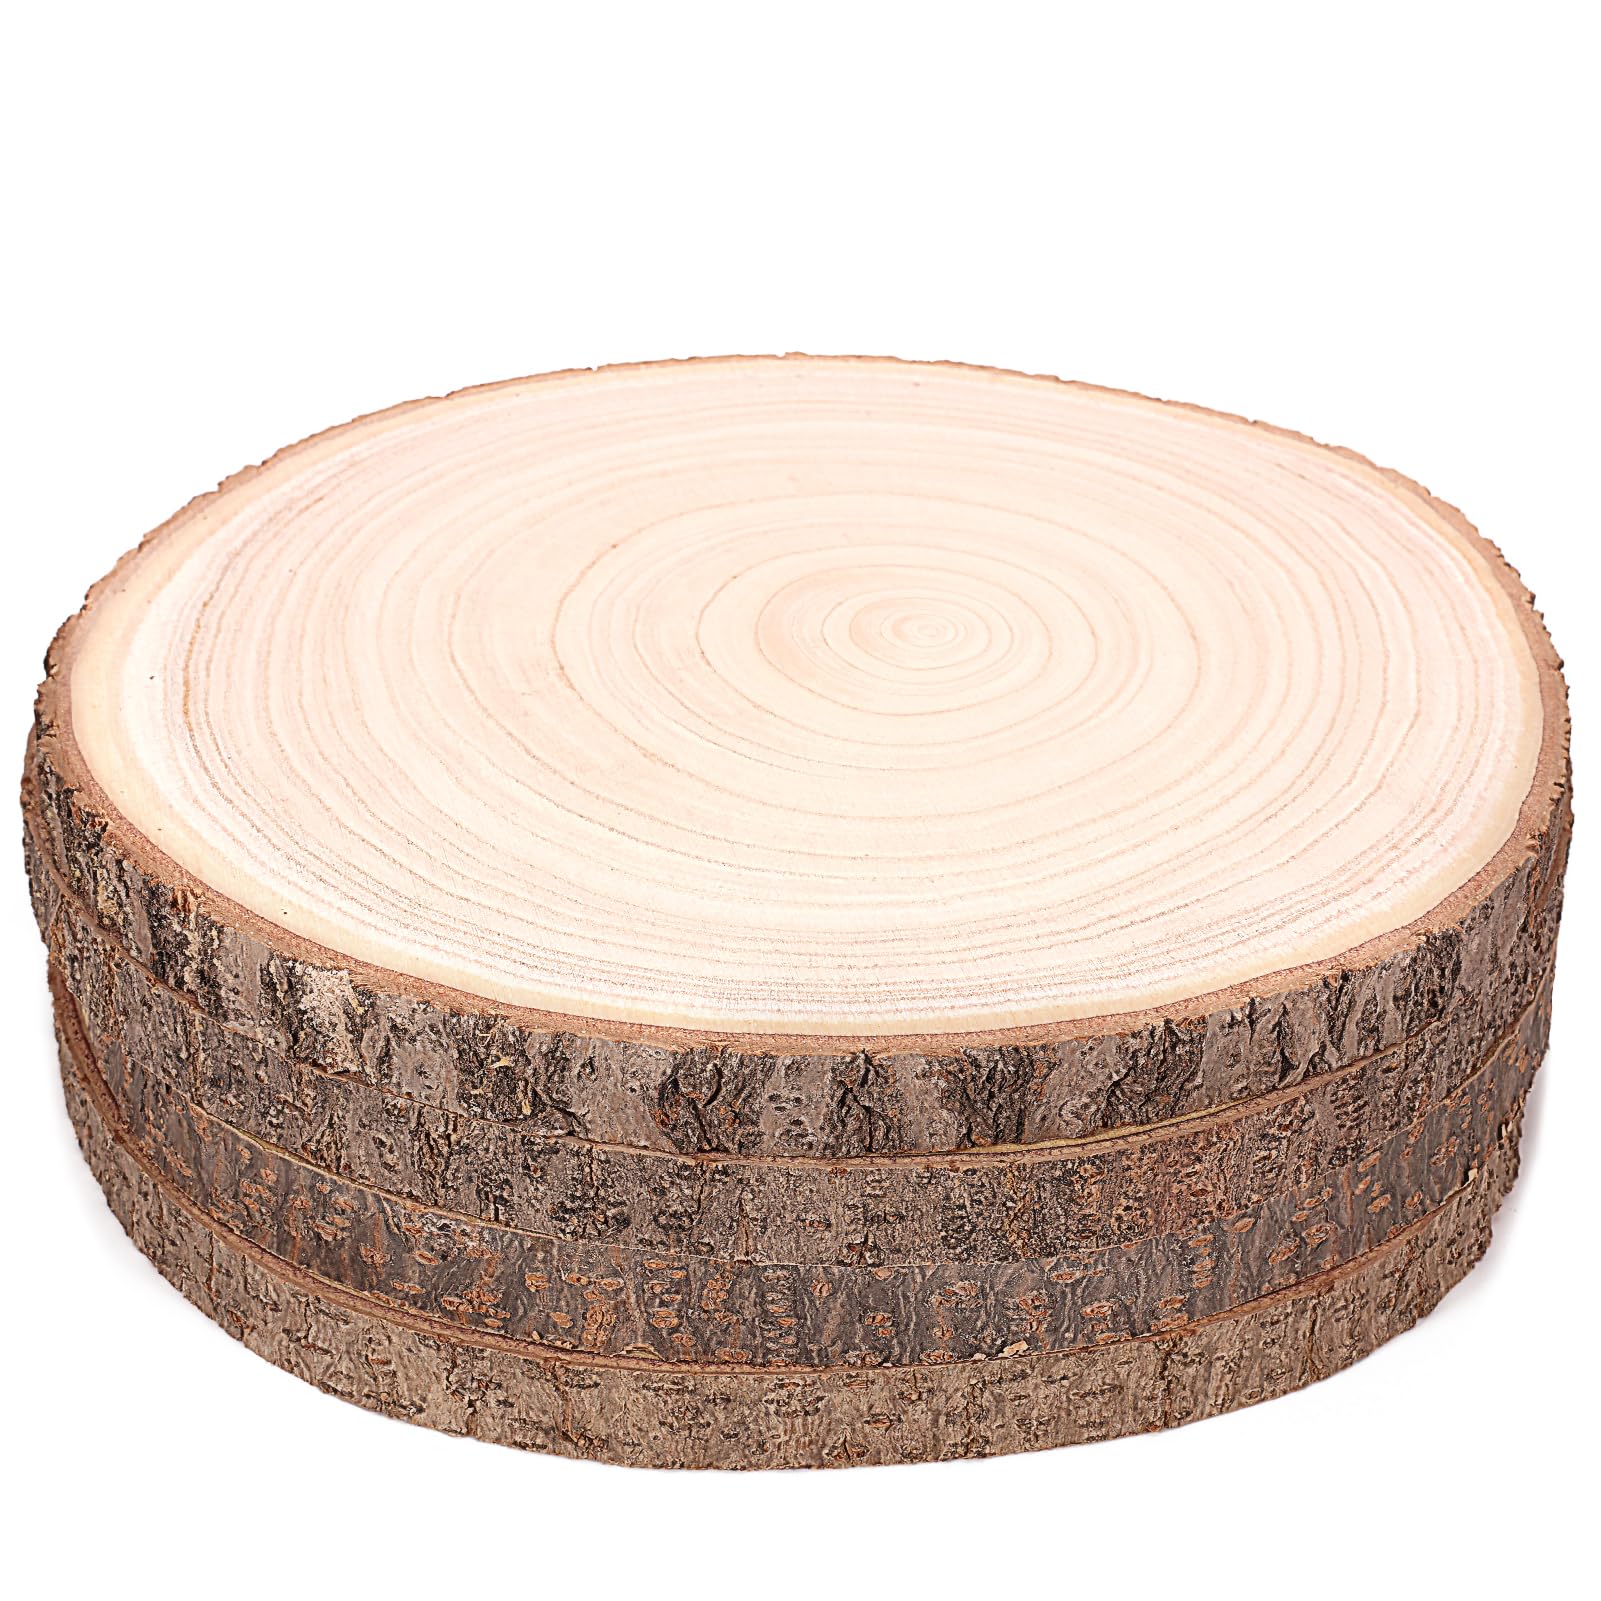 Predrilled Wooden Circles Round Discs with Bark for Wood Burning Projects  Arts Coaster Table Décor 20 PCs (Natural, 3.5 Inches)